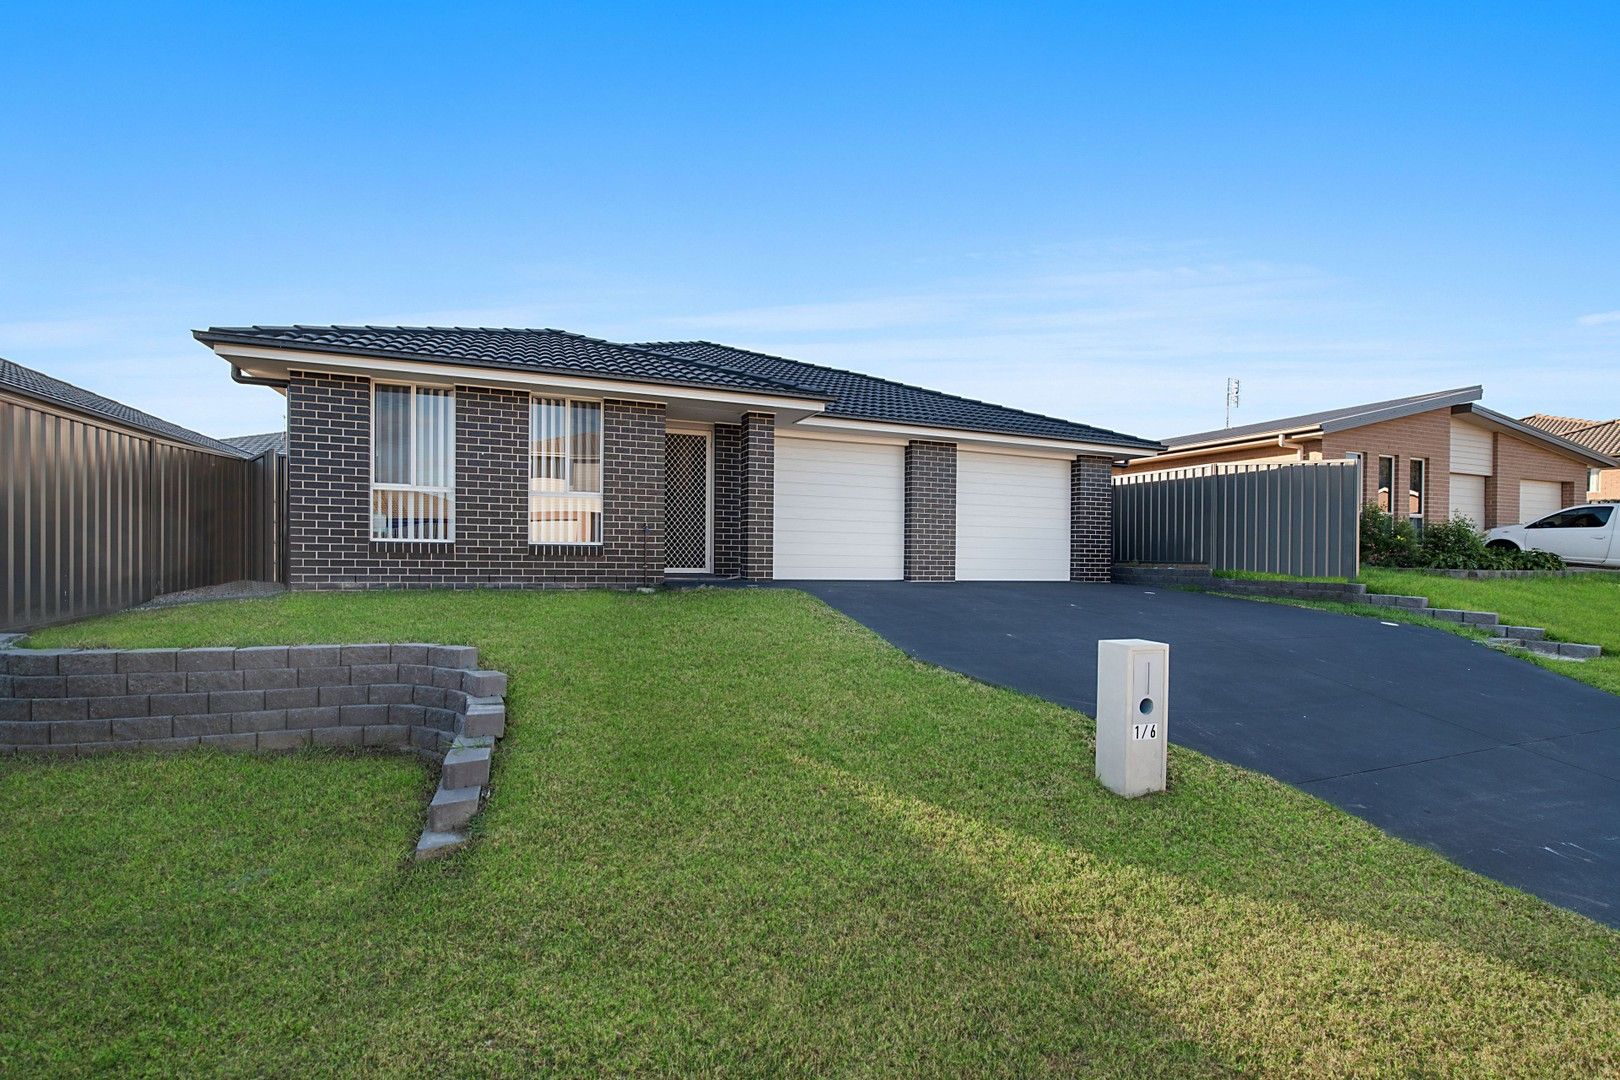 5 bedrooms Semi-Detached in 1 & 2/6 Shalistan Street CLIFTLEIGH NSW, 2321